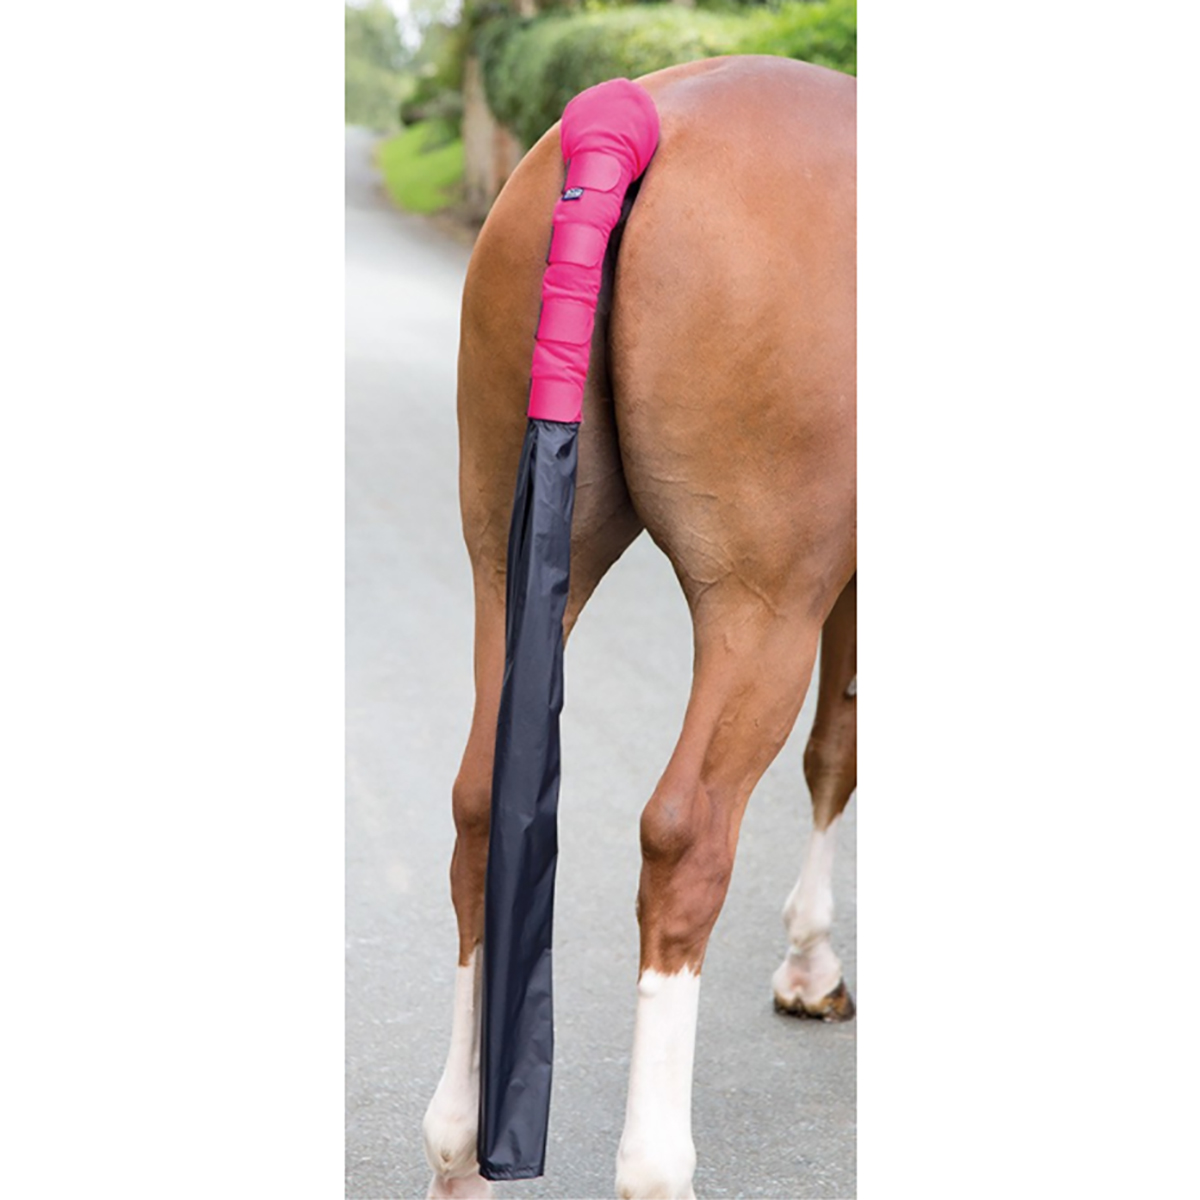 Shires Arma Padded Horse Tail Guard With Bag in Red one size 